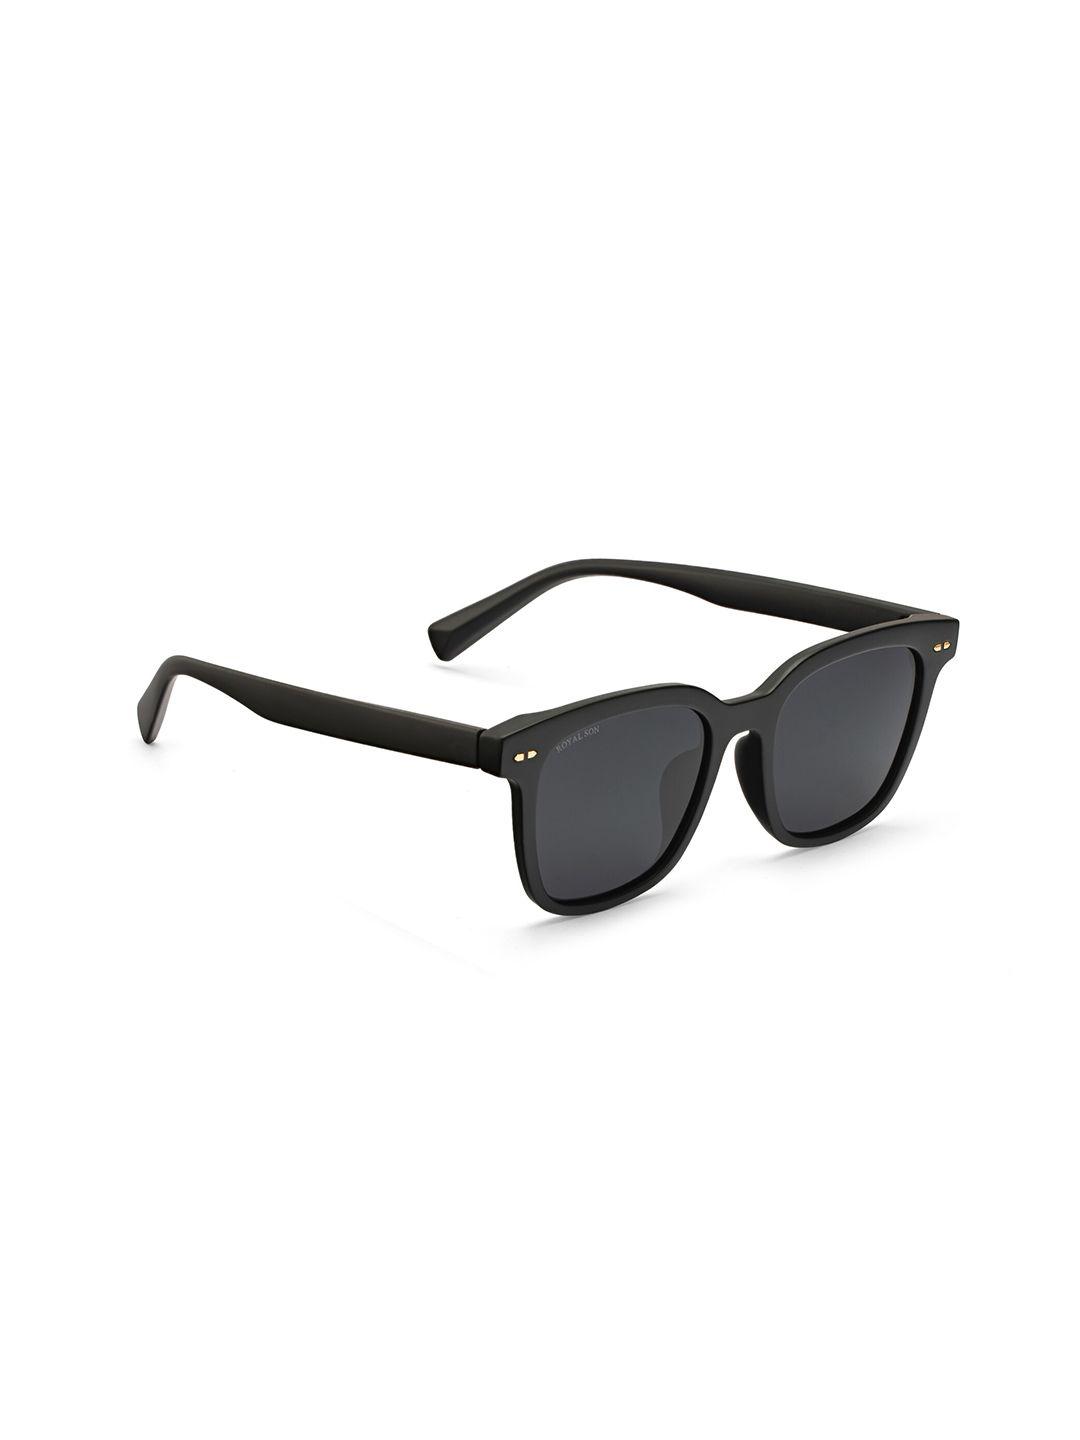 royal son lens & wayfarer sunglasses with polarised and uv protected lens chi00127-c5-r1